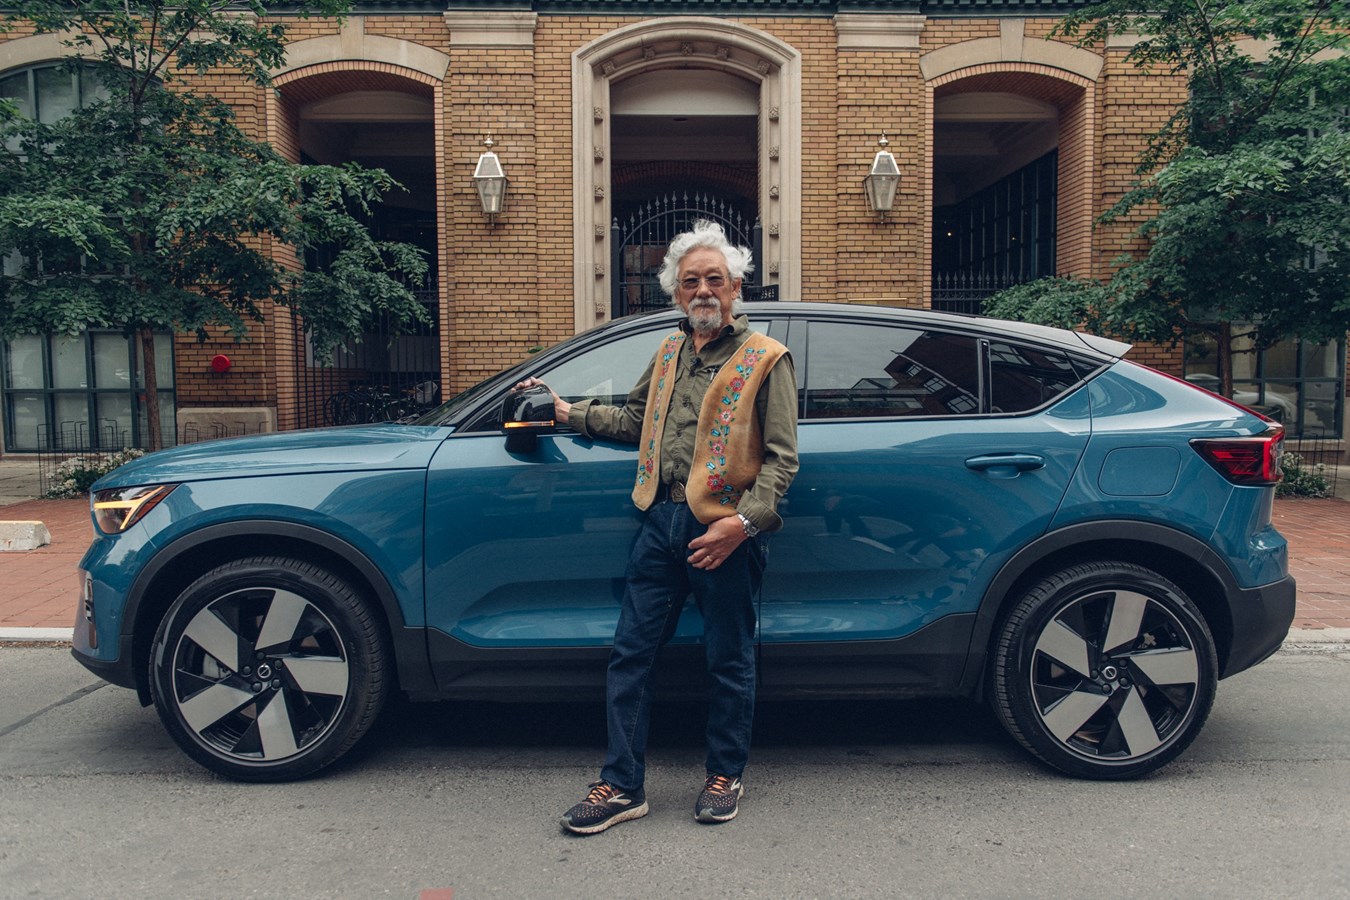 Electric Vehicle Revolution: 4,100 km Road Trip to Promote Low-Carbon Travel Across Canada in the Volvo C40 Recharge